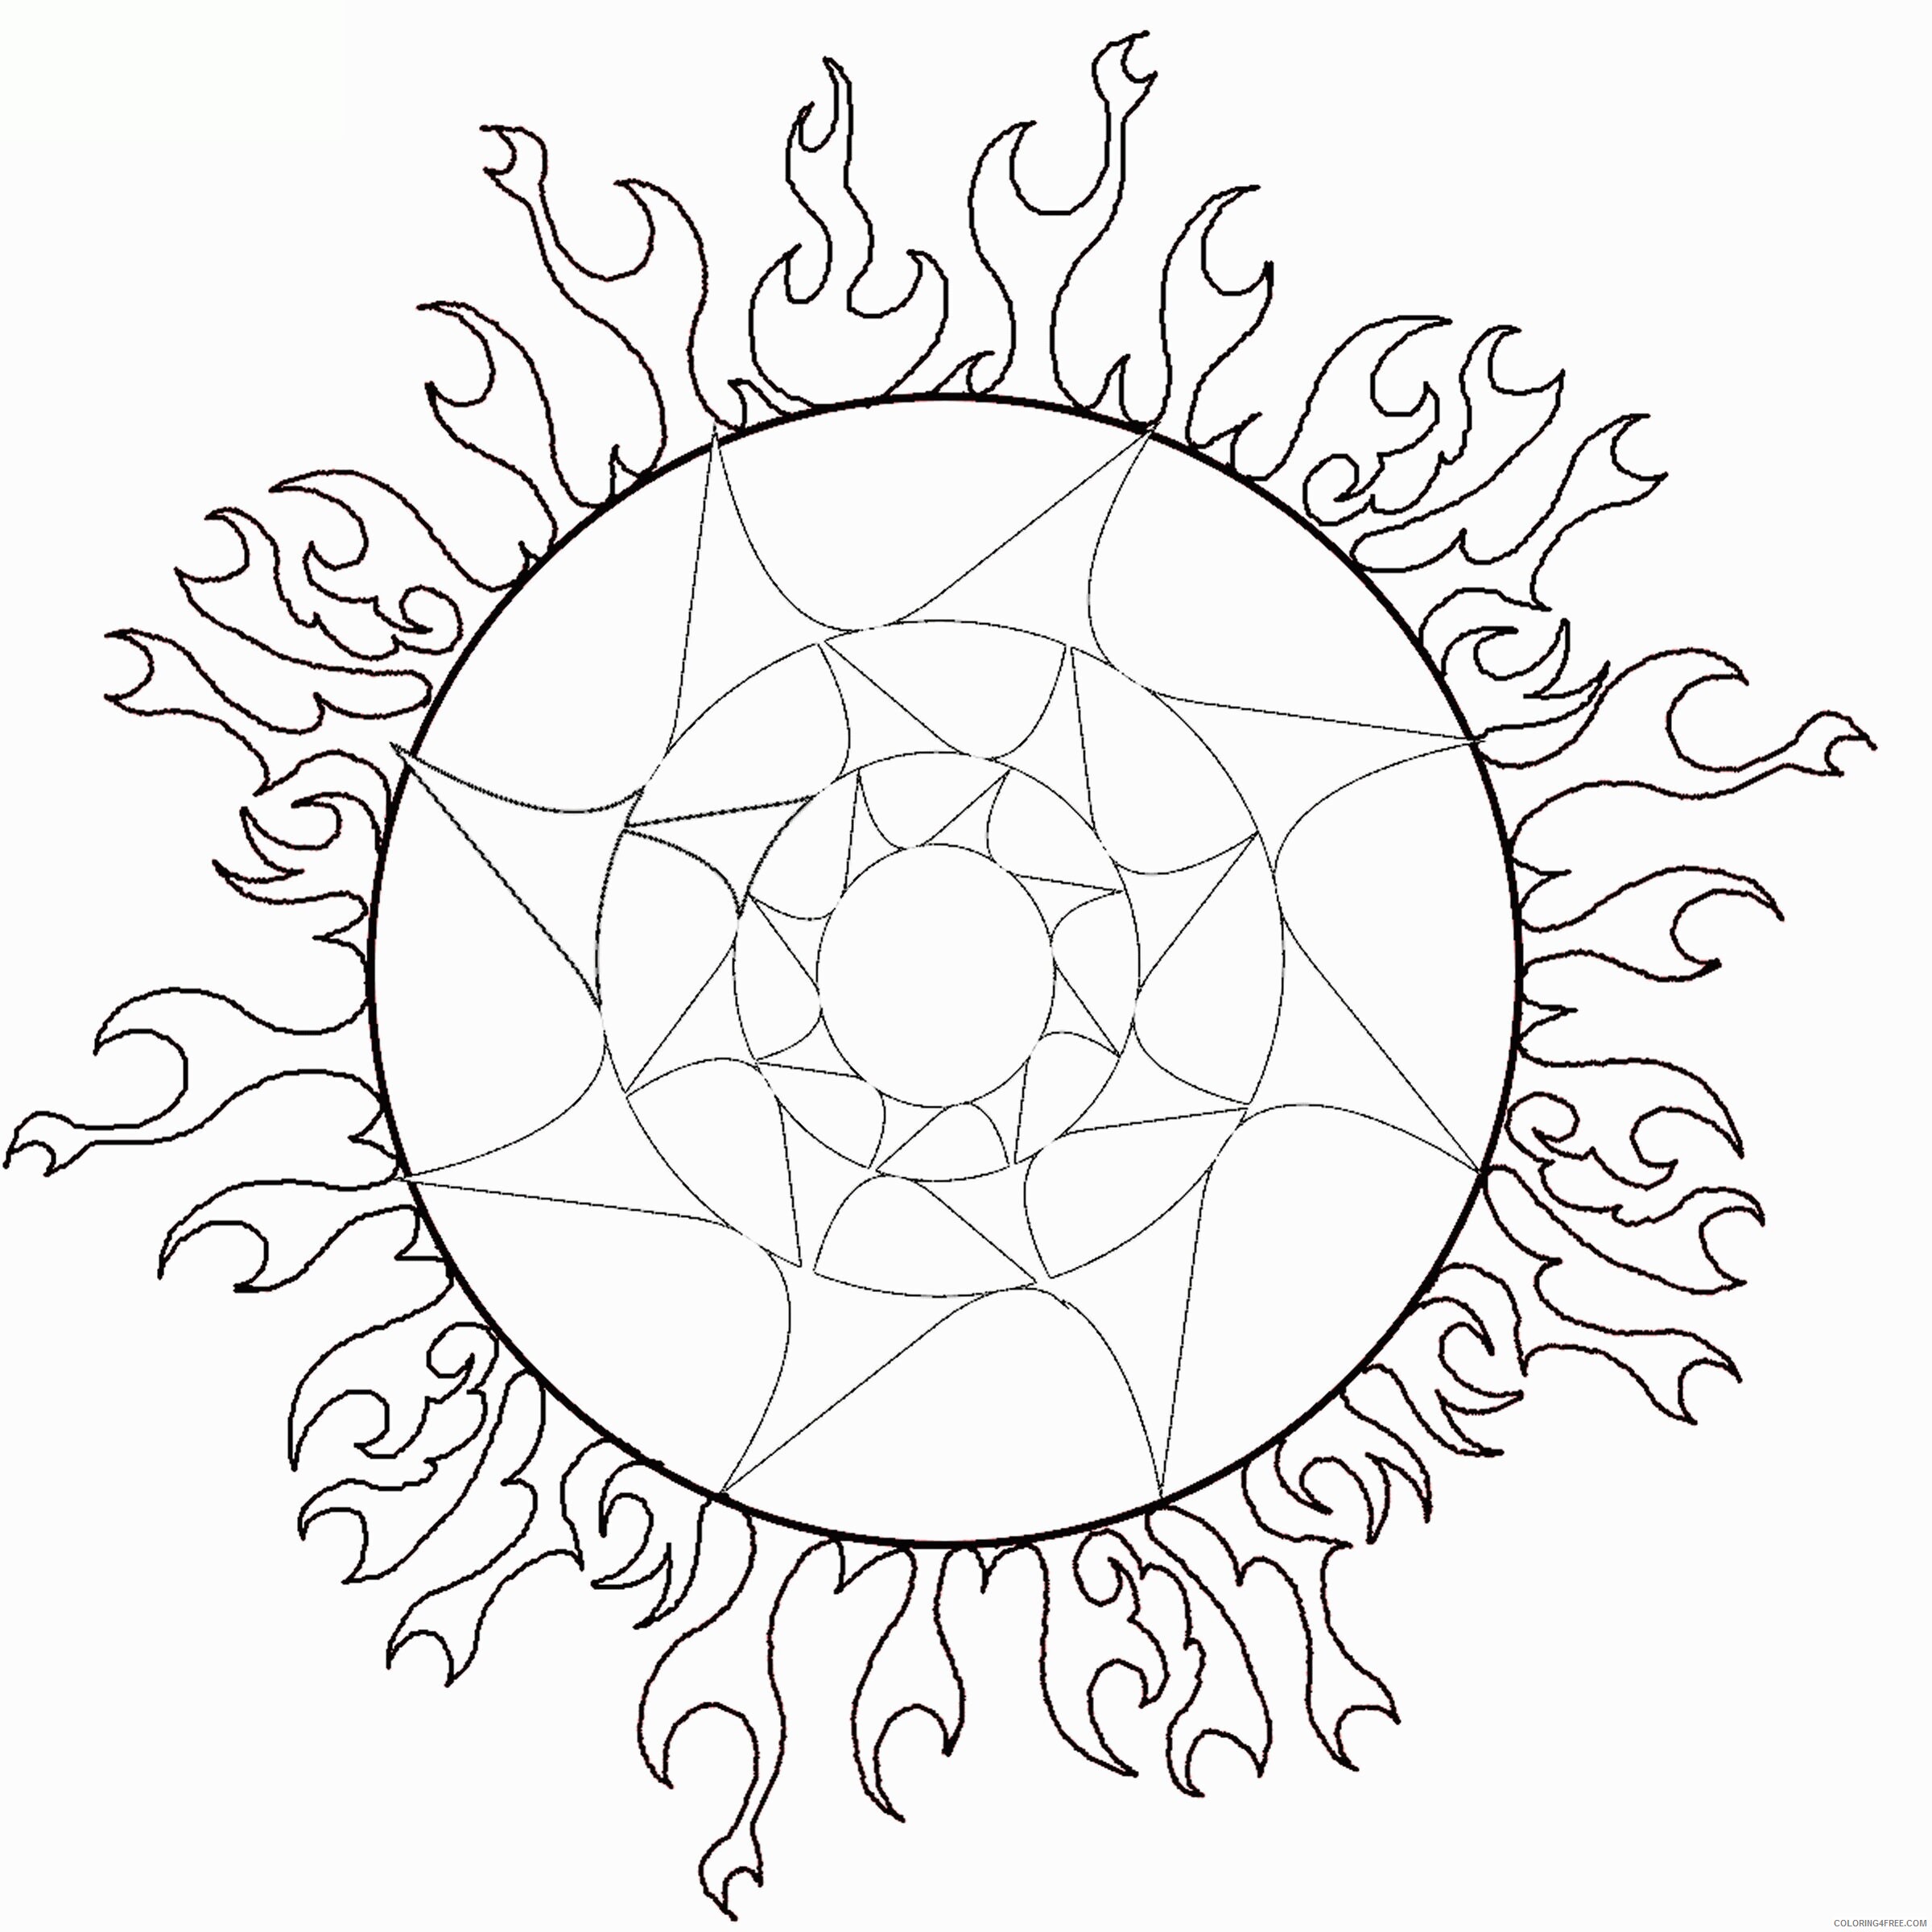 Adult Coloring Pages of The Sun Printable Sheets 6 Best Images of Printable 2021 a 2033 Coloring4free